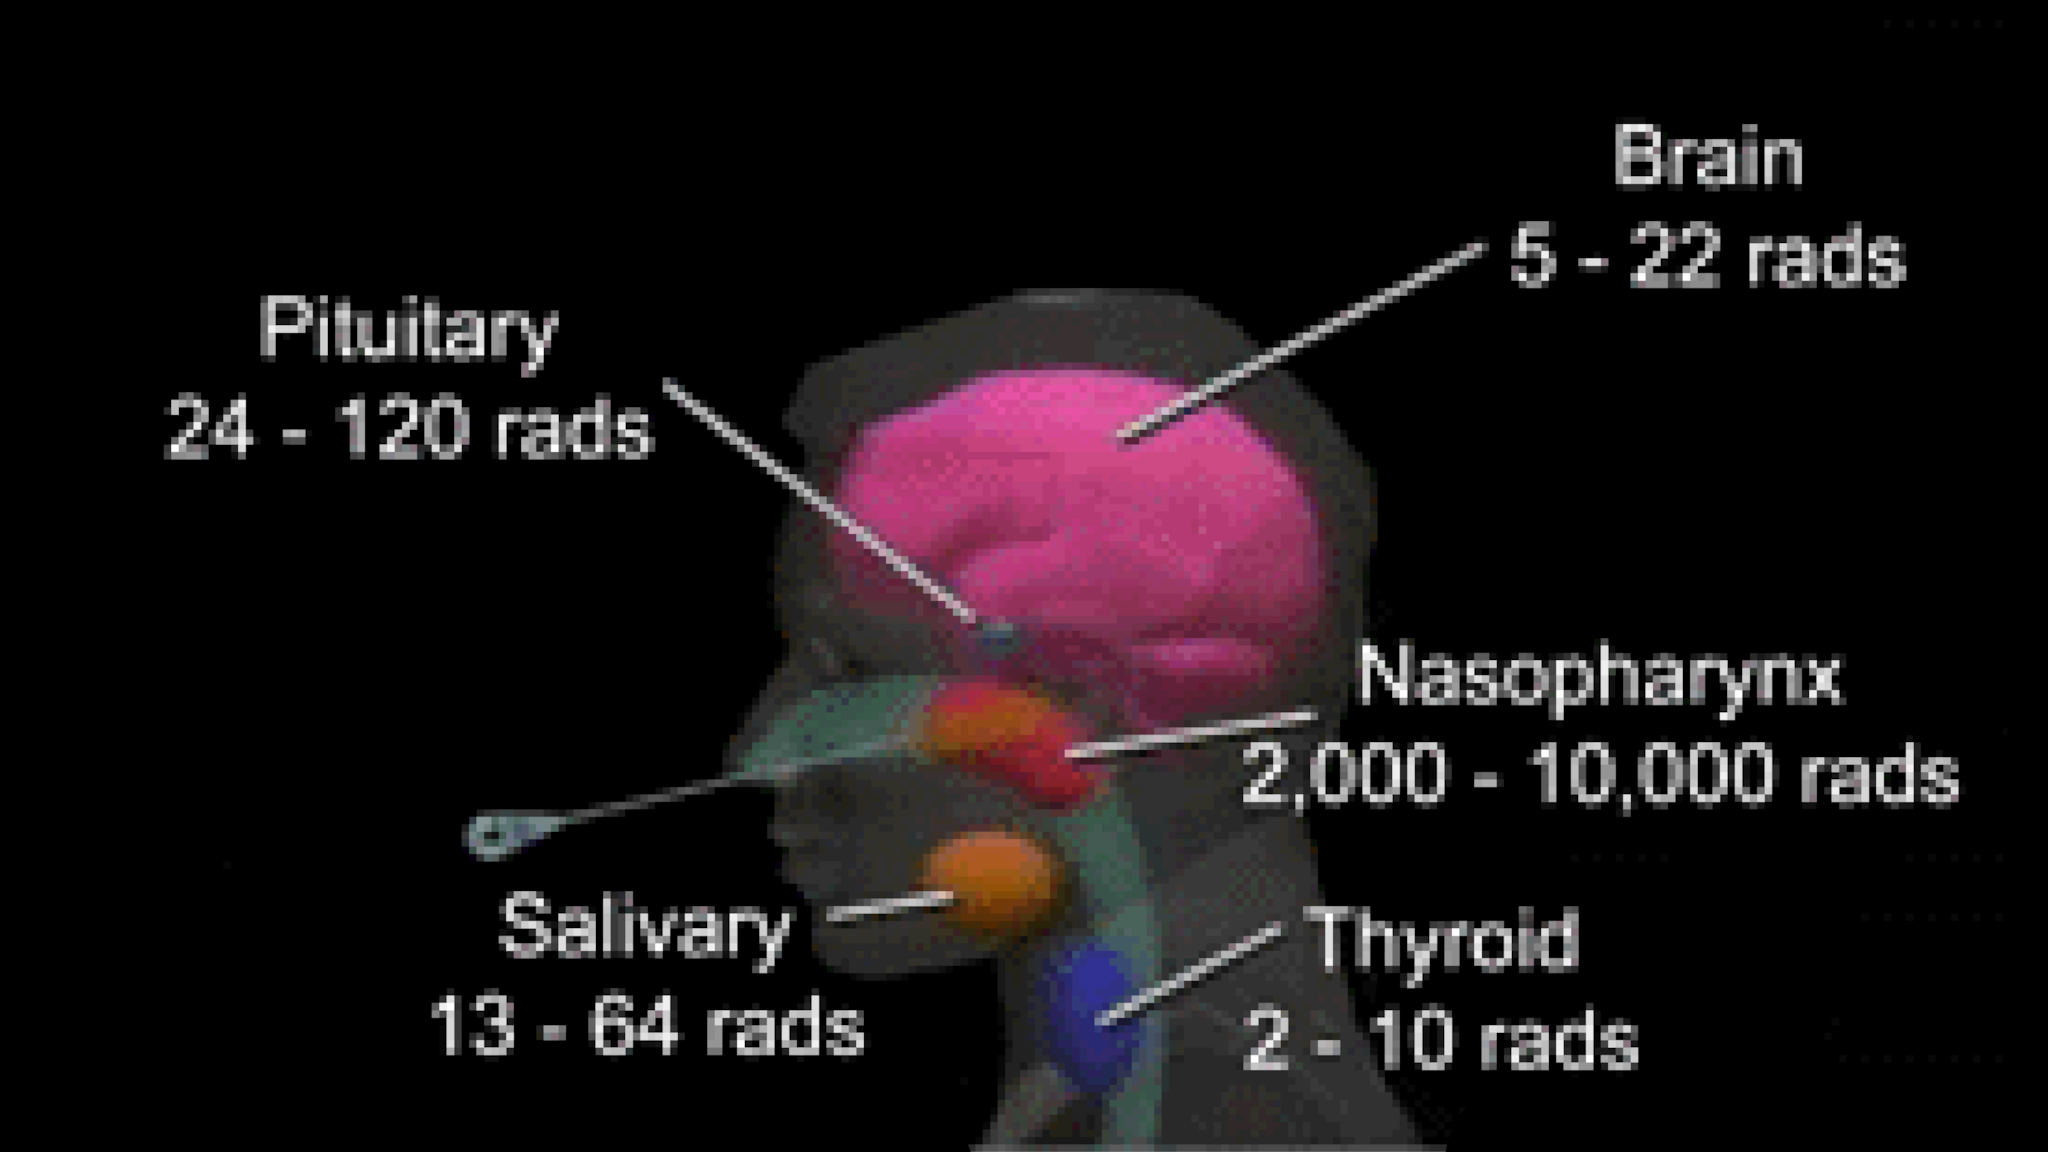 Example of radiation levels of human tissues during a Nasopharyngeal Radium Irradiation procedure